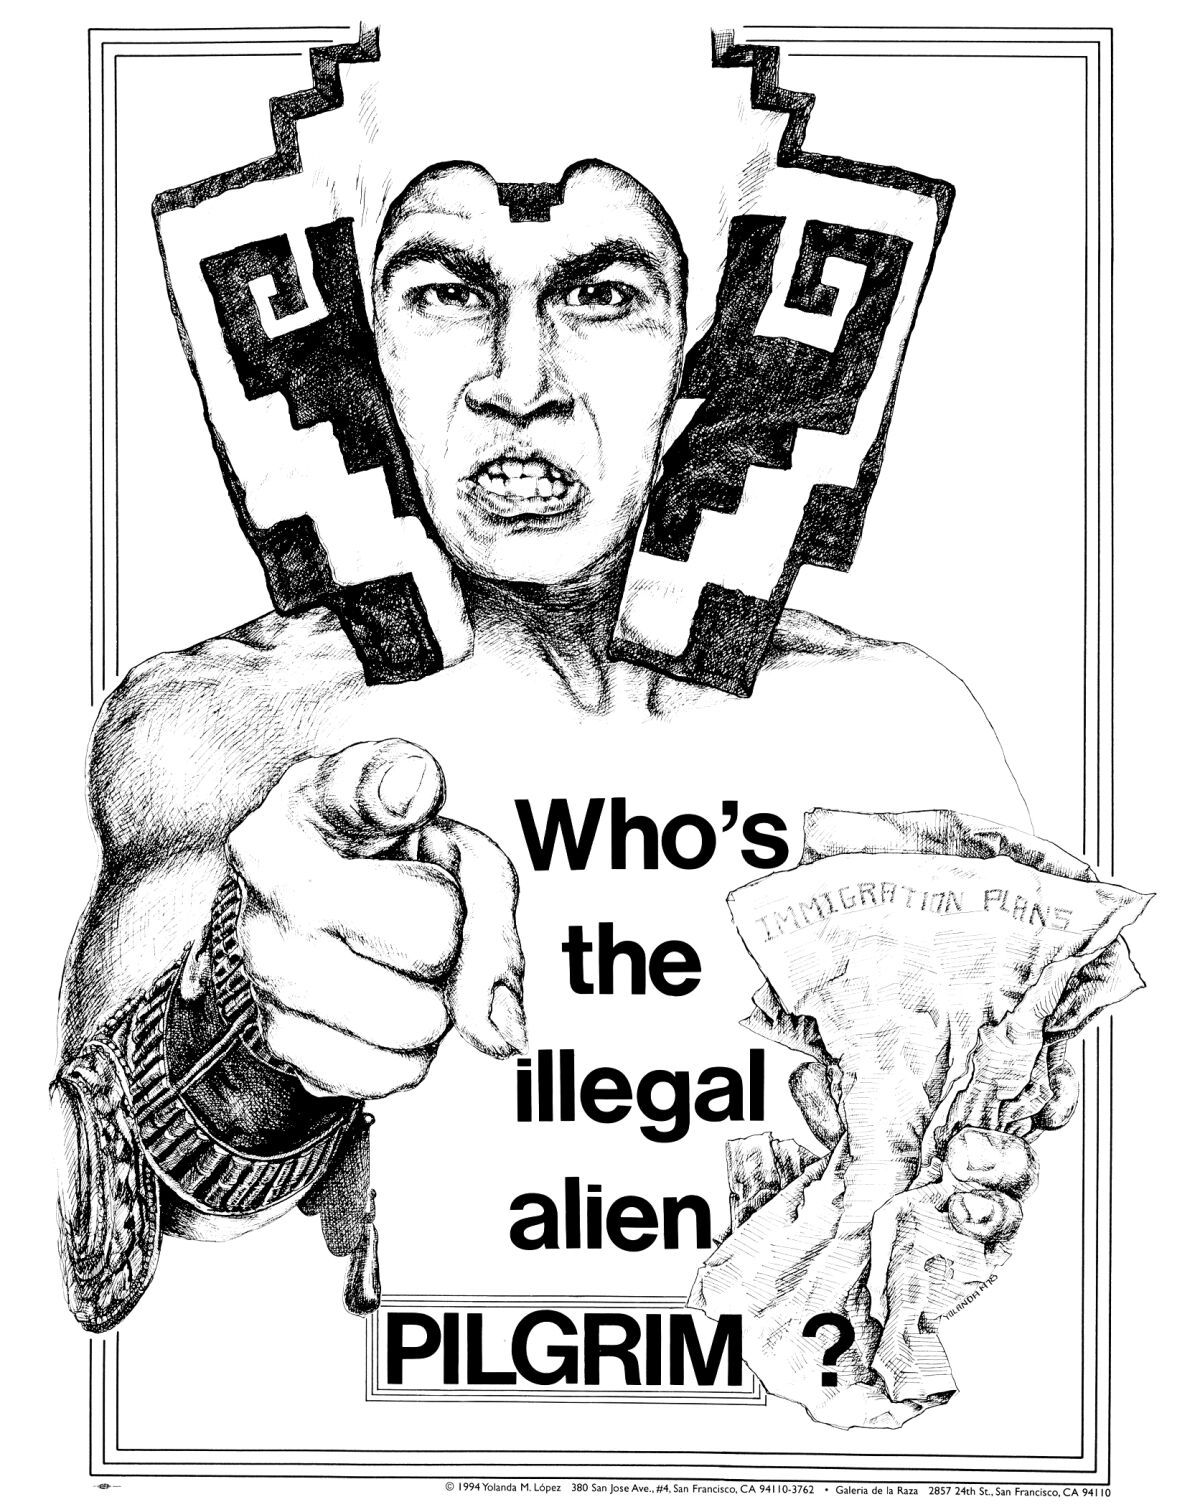 A drawing of a man in Aztec headdress pointing a finger, with the words "Who's the illegal alien, pilgrim?"